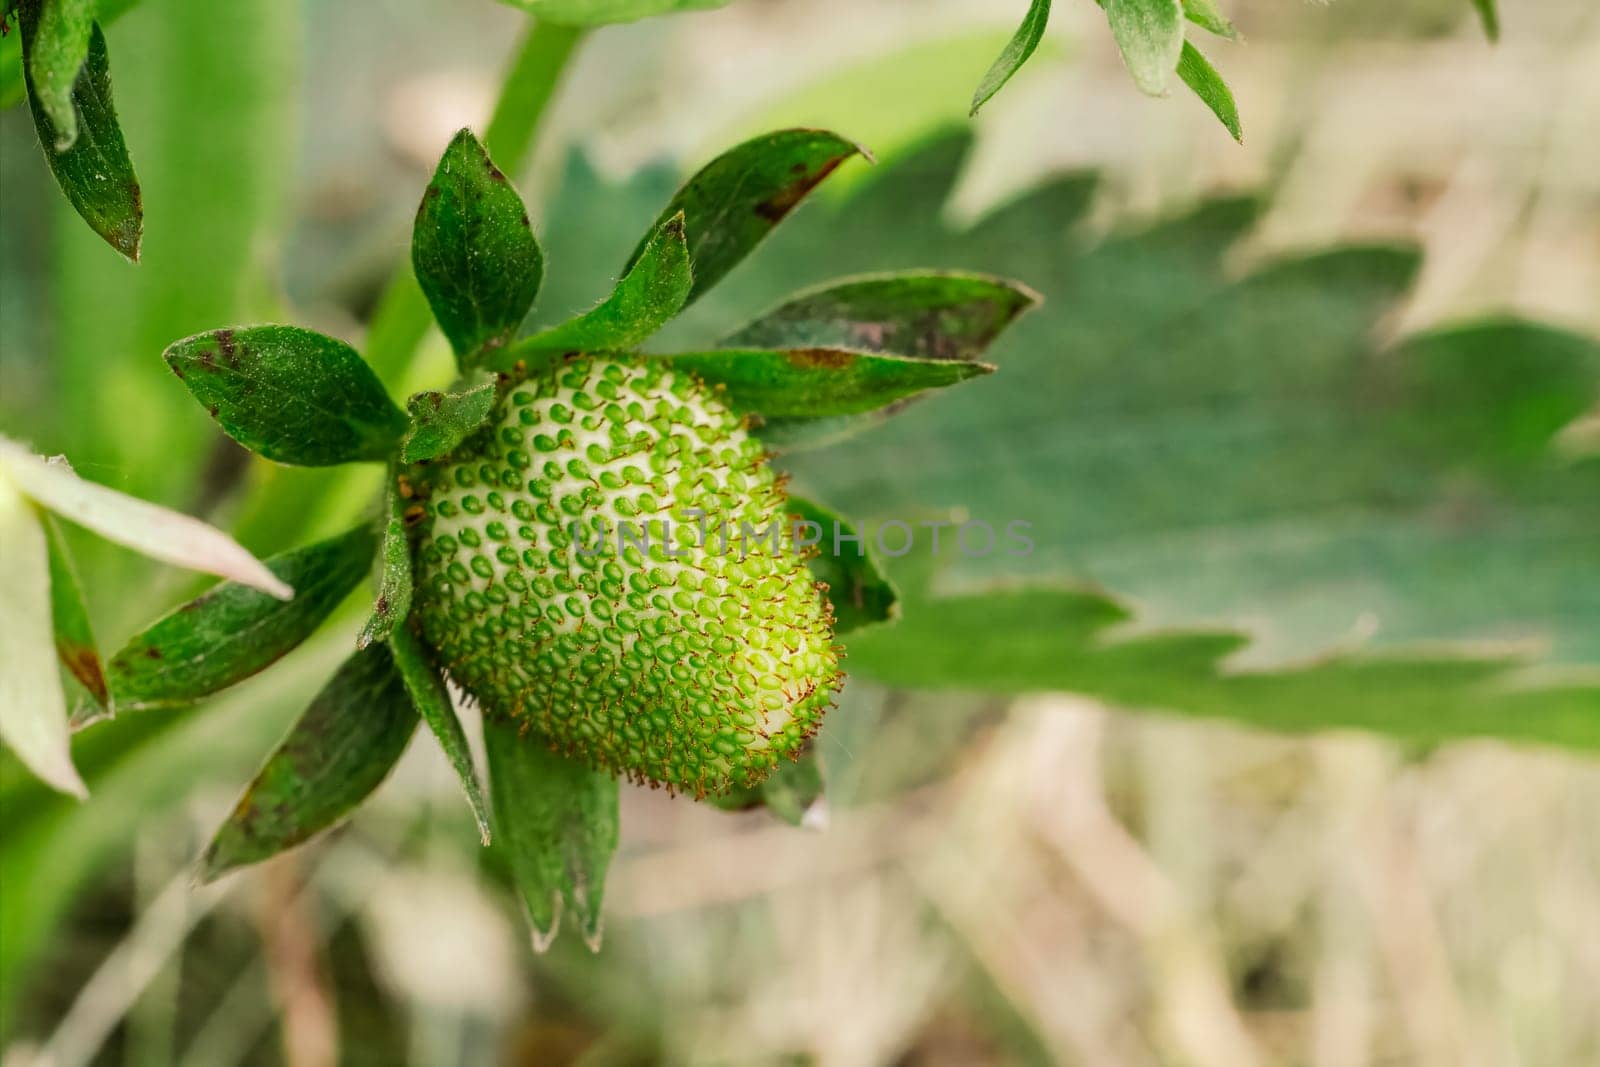 Strawberry plant. Strawberry bush in the garden with an unripe berry. Shallow depth of field.